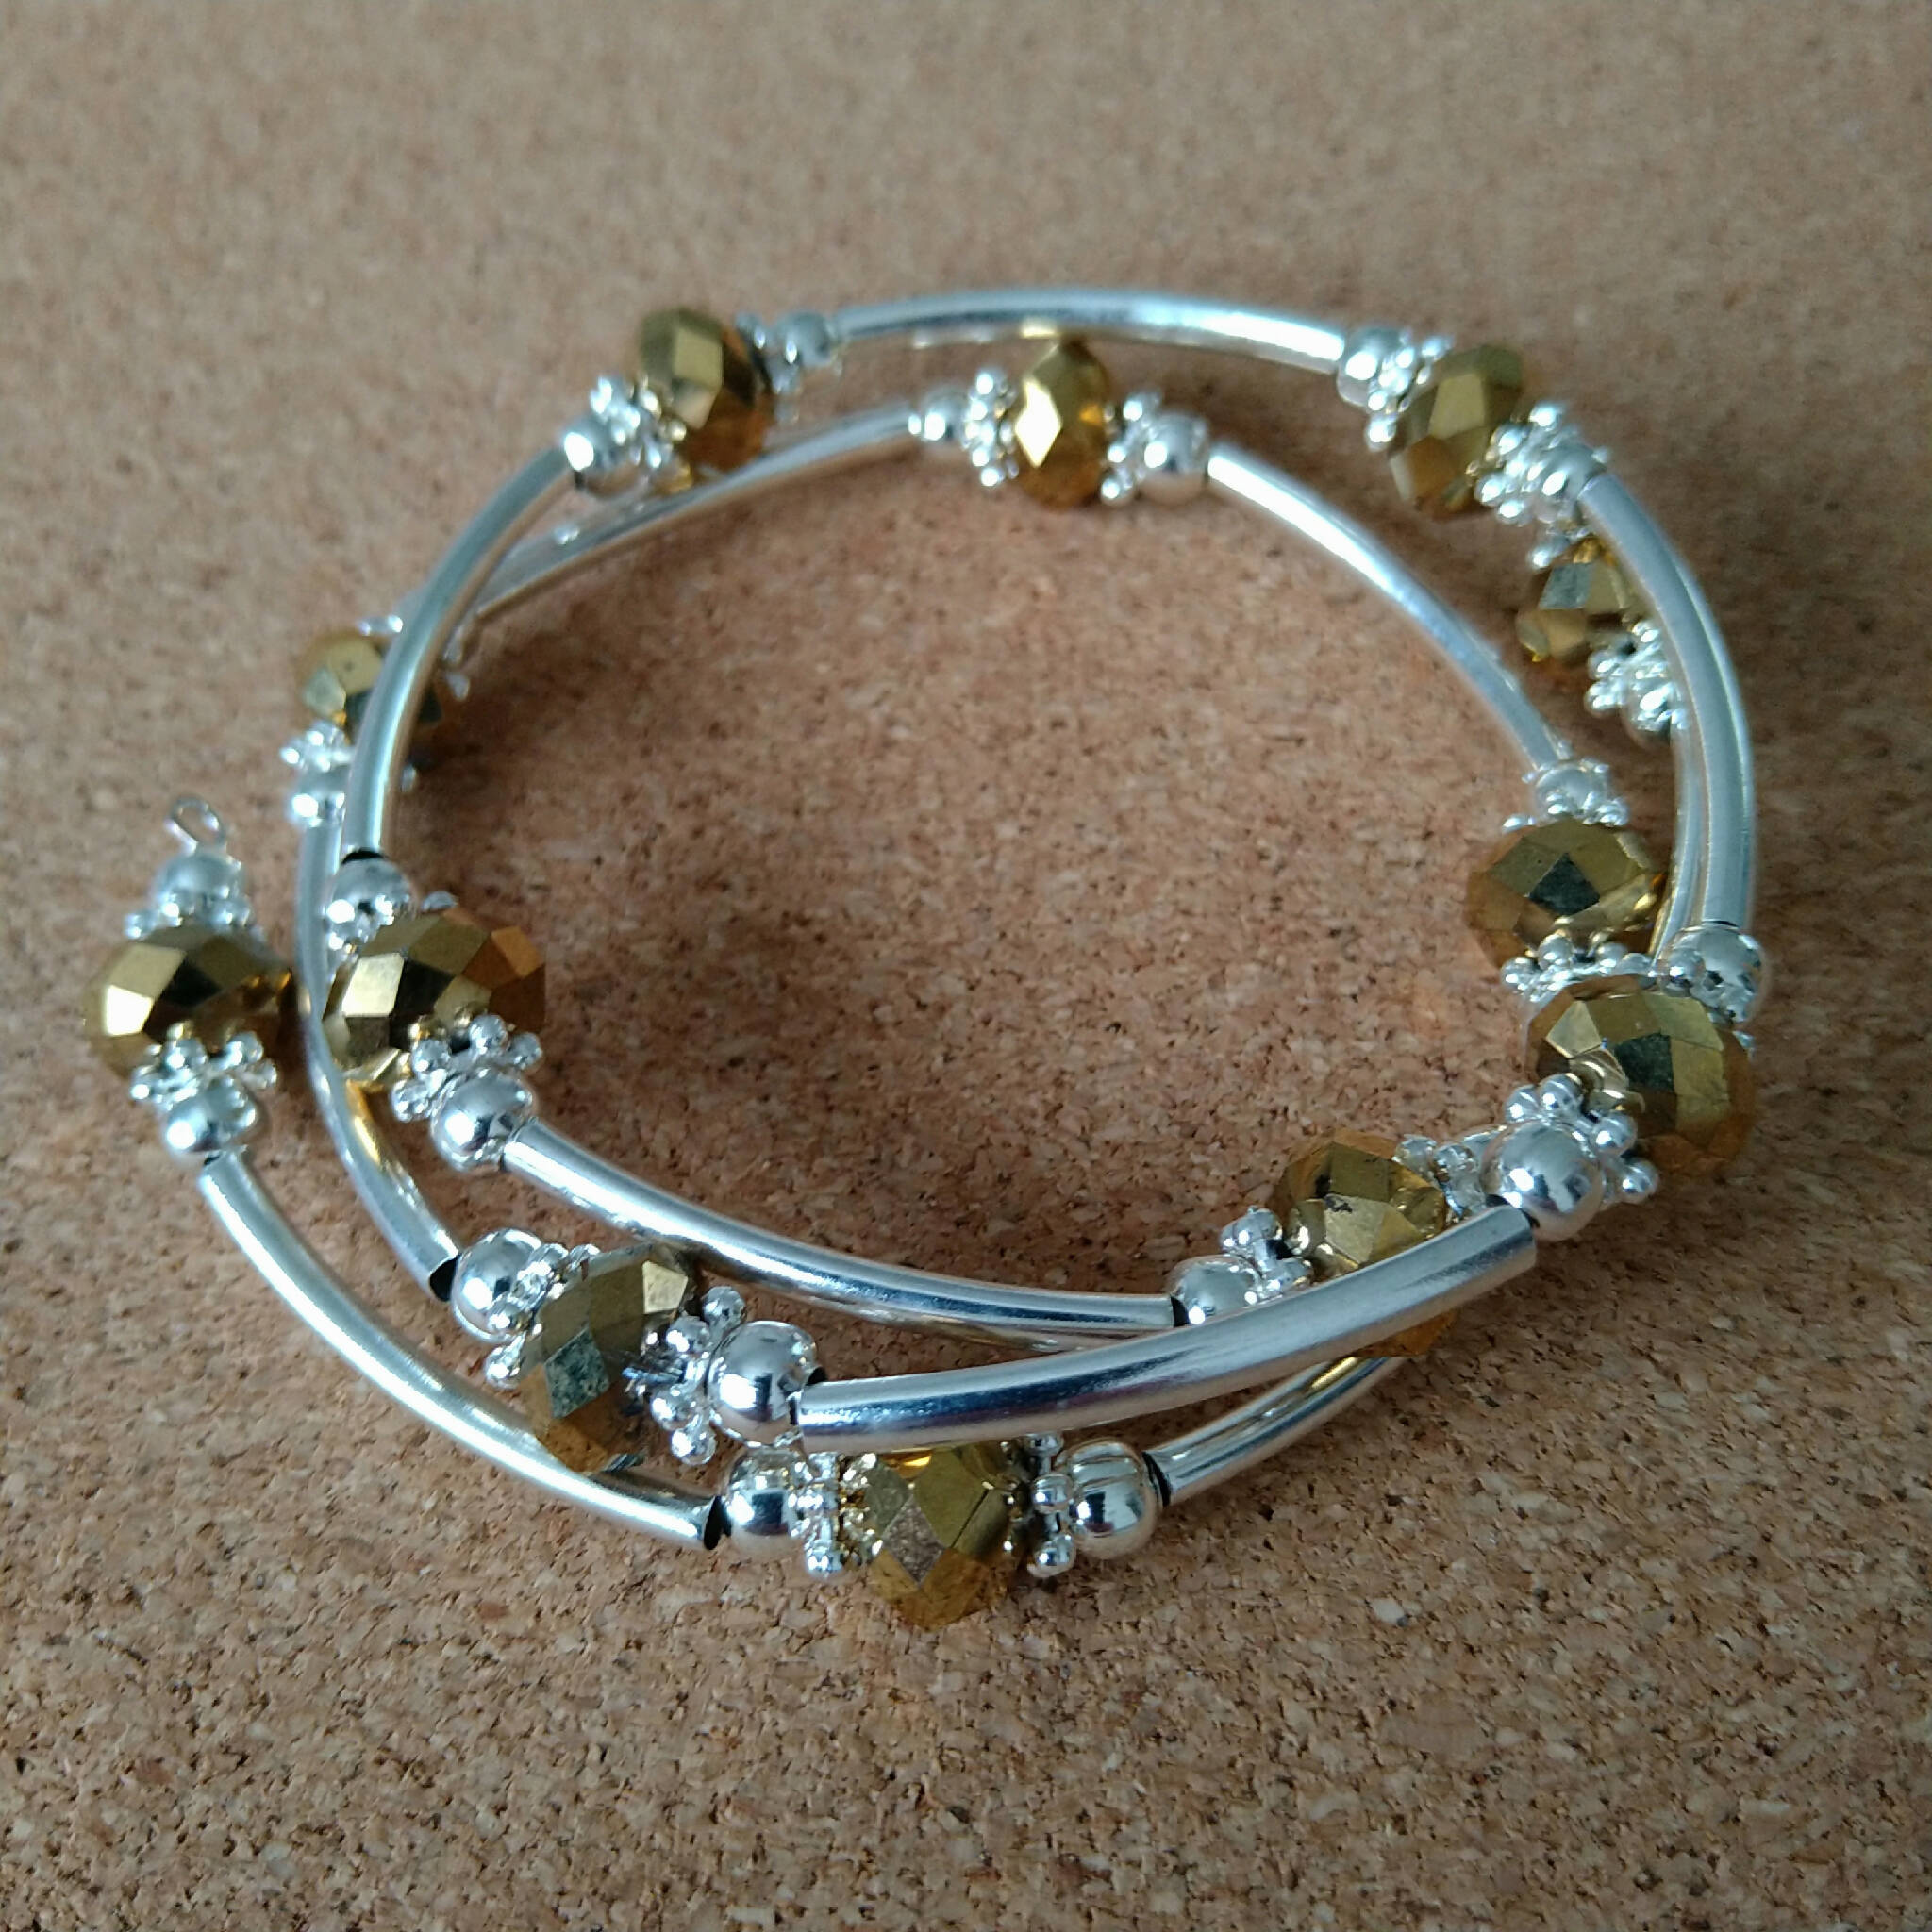 2.5 strand silver toned memory wire bangle with gold & silver coloured beads, 6.5cm diameter